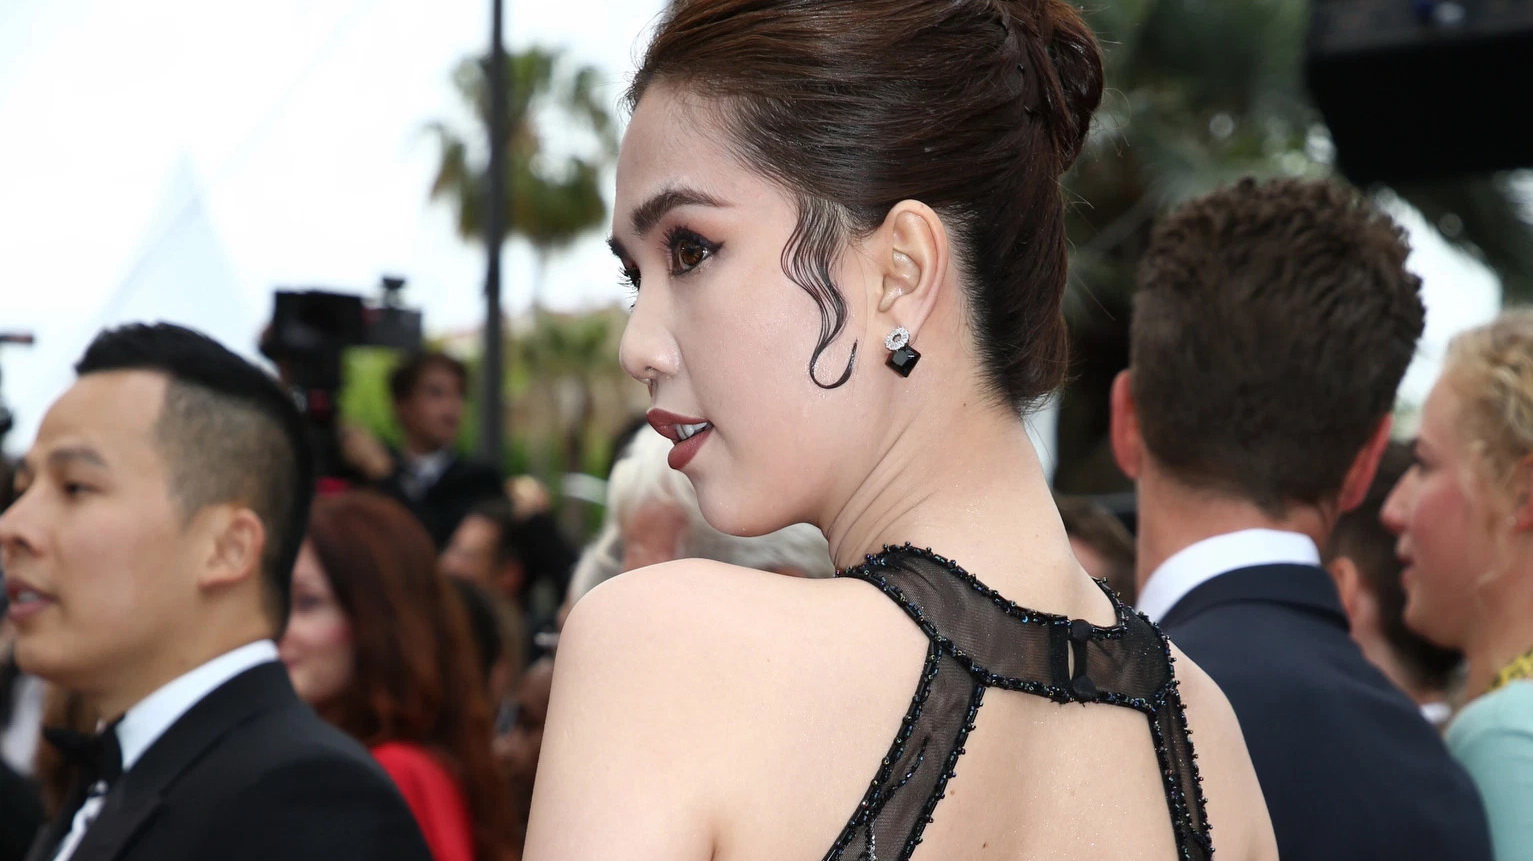 Vietnamese model bashed for wearing revealing gown in Cannes